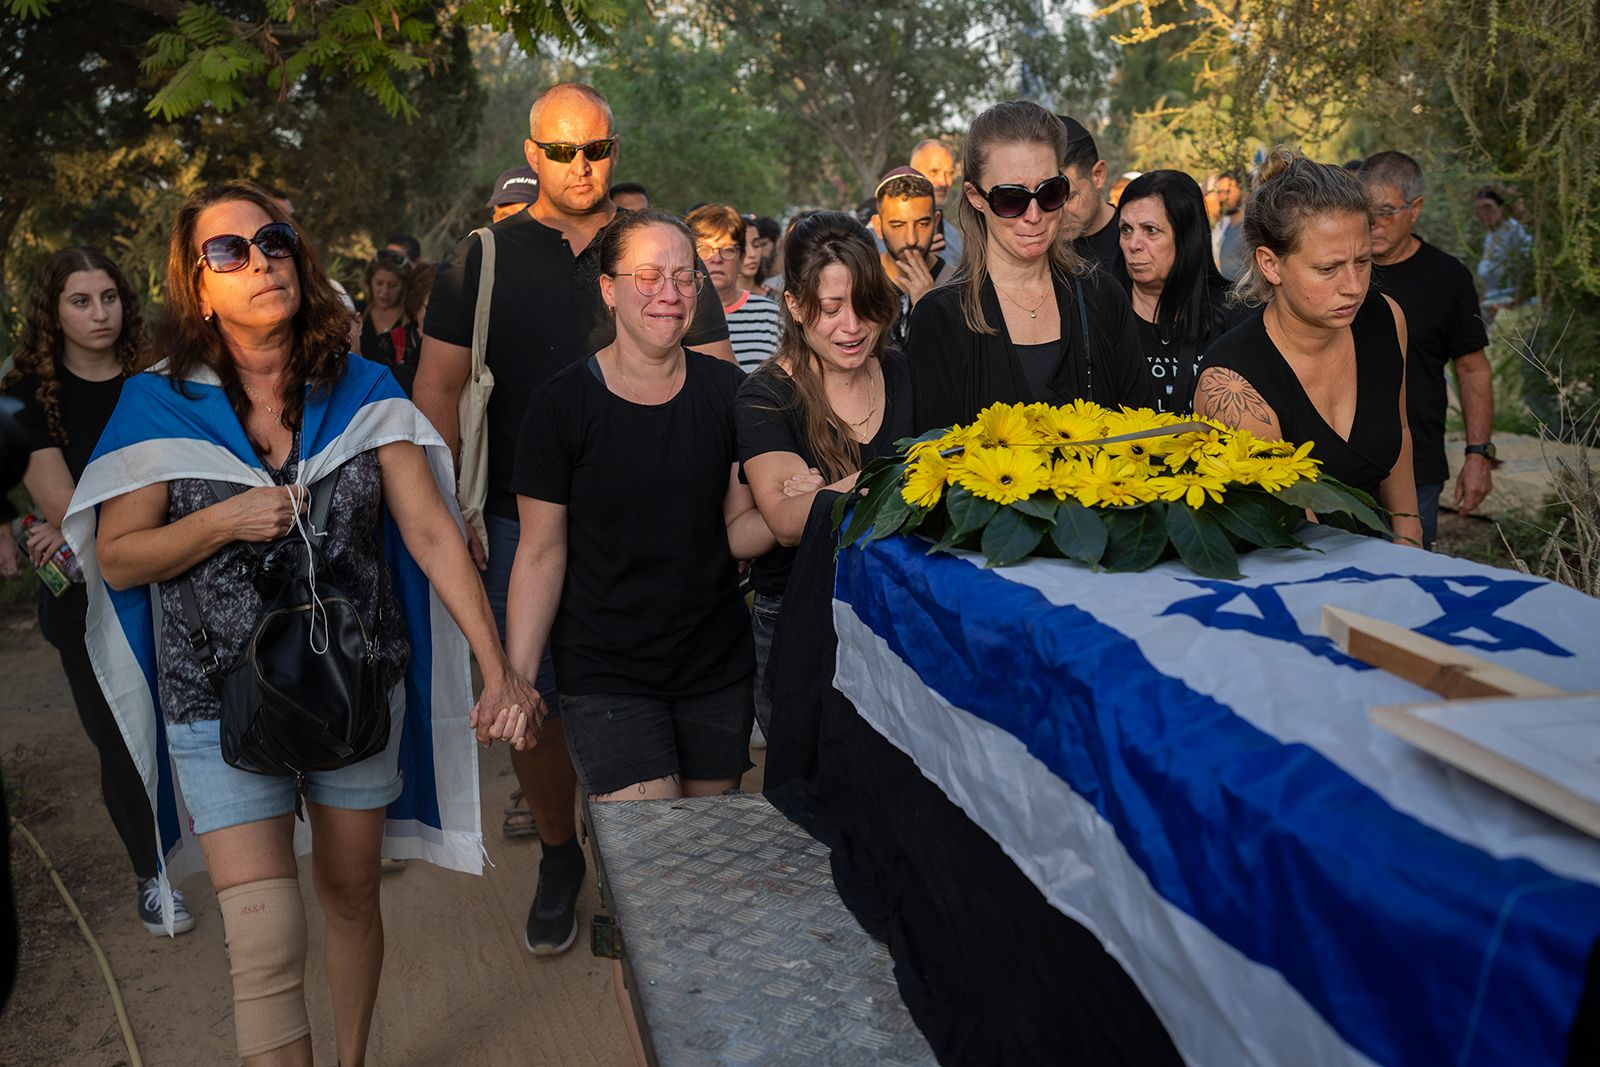 Relatives attend the funeral of Albert Miles, 81, at the Kibbutz Revivim cemetery, south Israel, on October 30. Albert Miles was killed during the Hamas attack on October 7, in Kibbutz Be'eri near the border with Gaza.